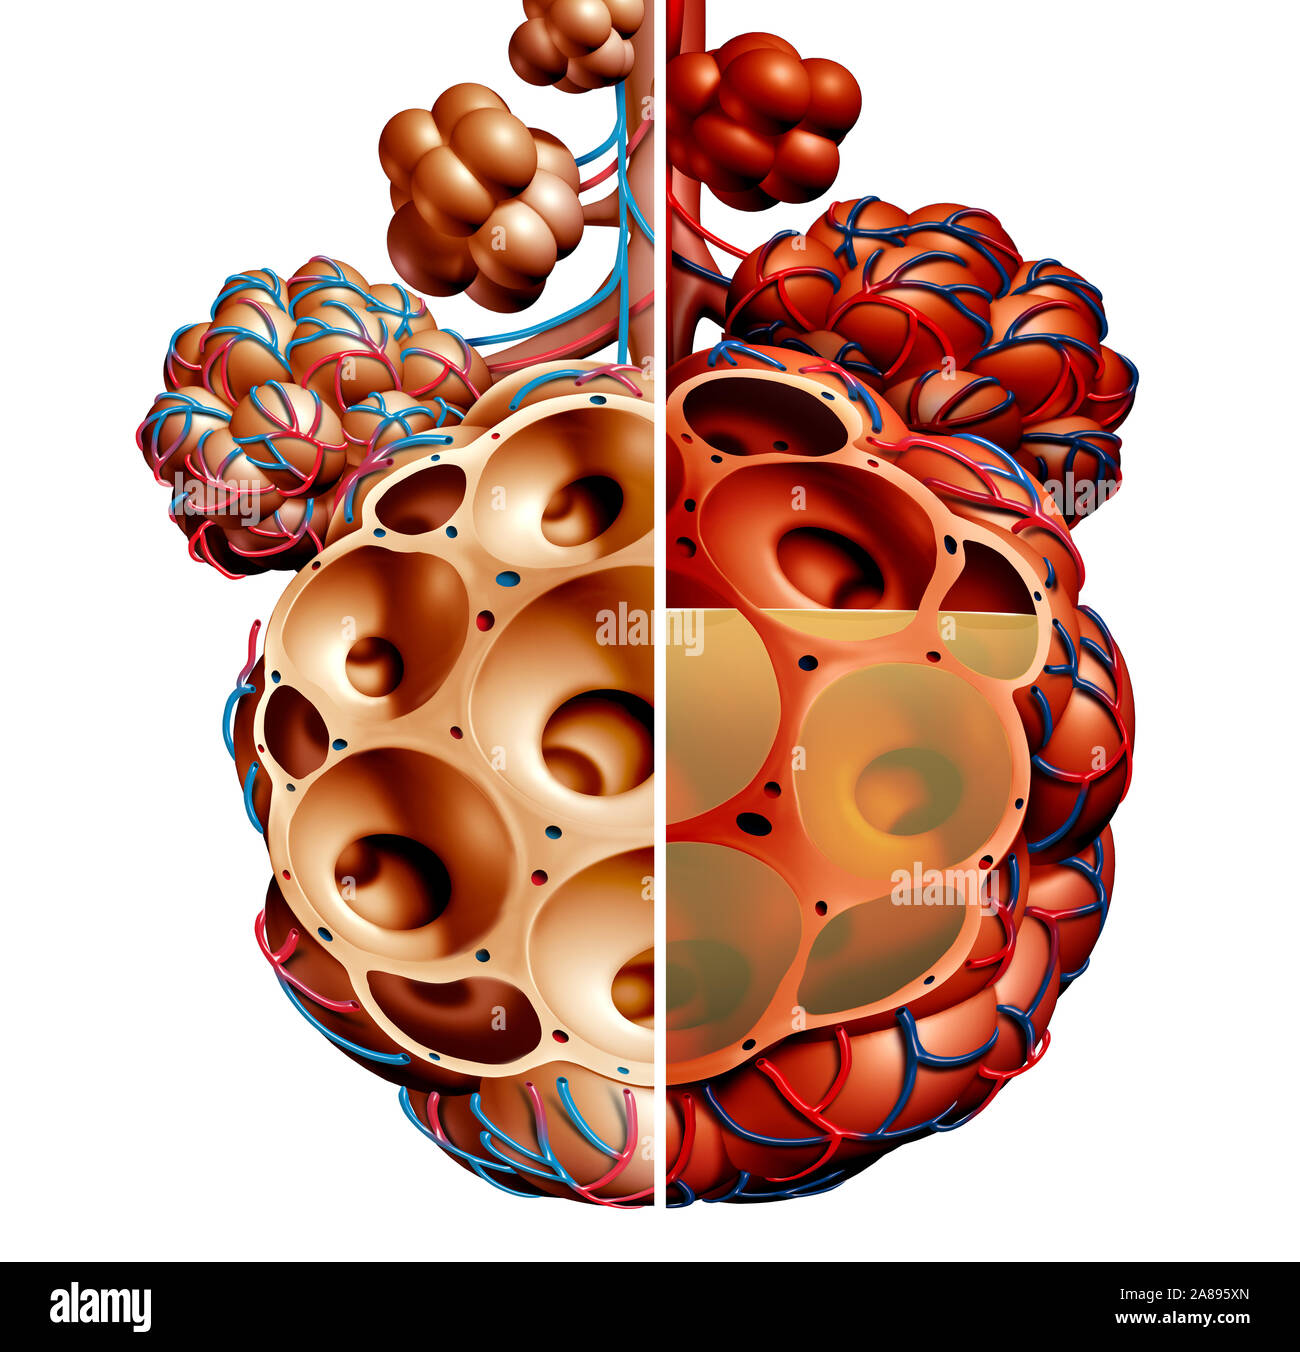 Pneumonia and Pulmonary alveoli with fluid diagram or alveolus inflammation anatomy diagram as a medical concept of healthy and unhealthy lung. Stock Photo